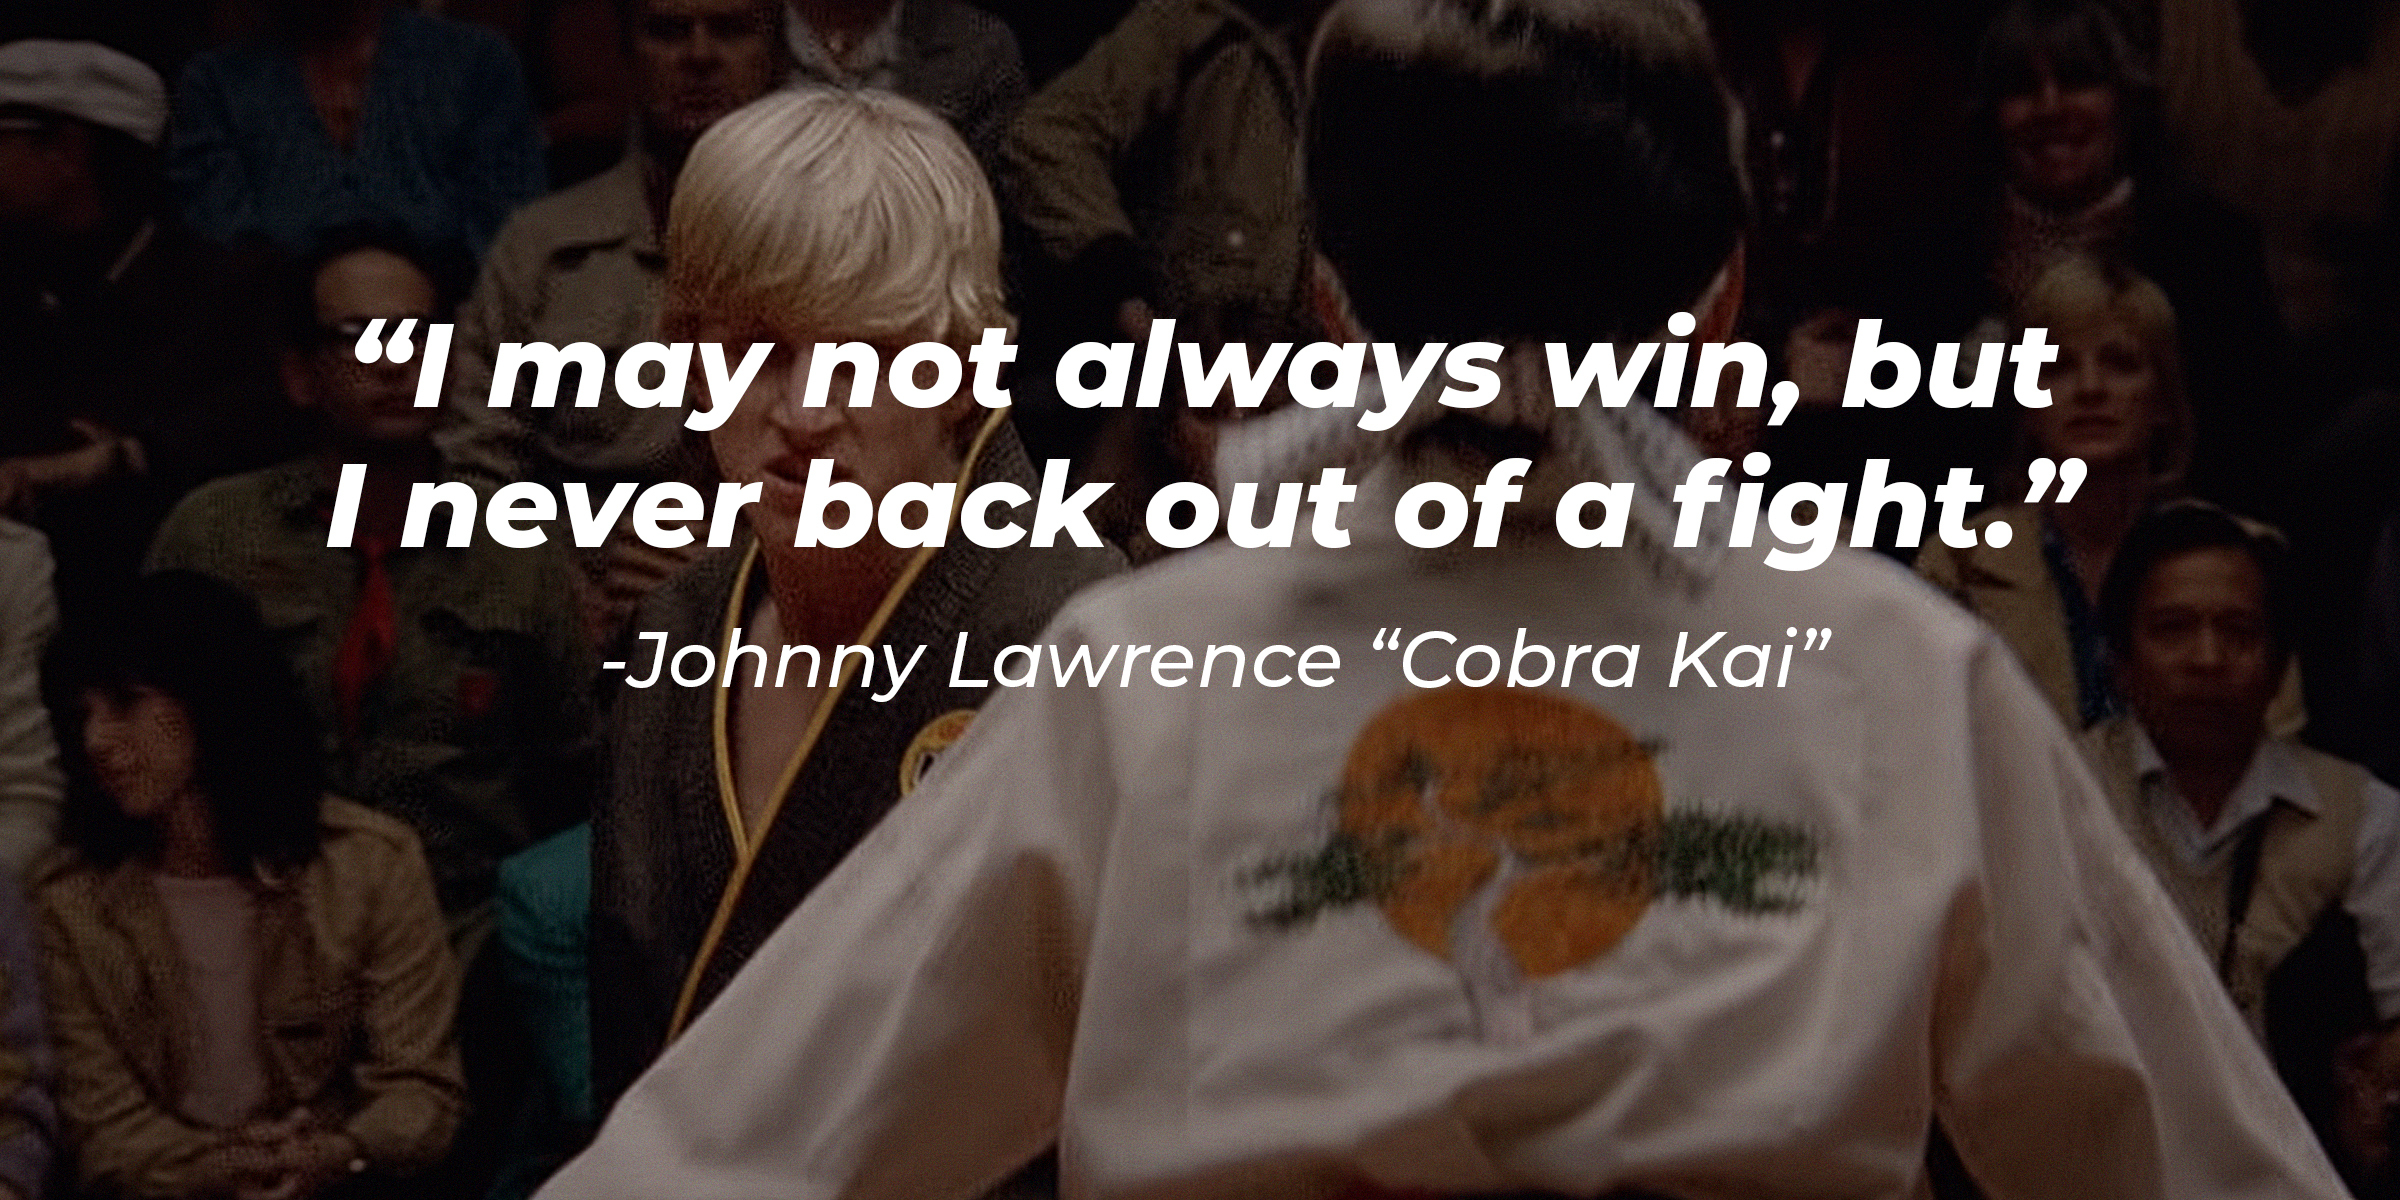 Johnny Lawrence's quote from "Cobra Kai:" "You can leave your asthma and your peanut allergies and all that other made-up [expletive] outside.” | Source: Youtube.com/cobrakai